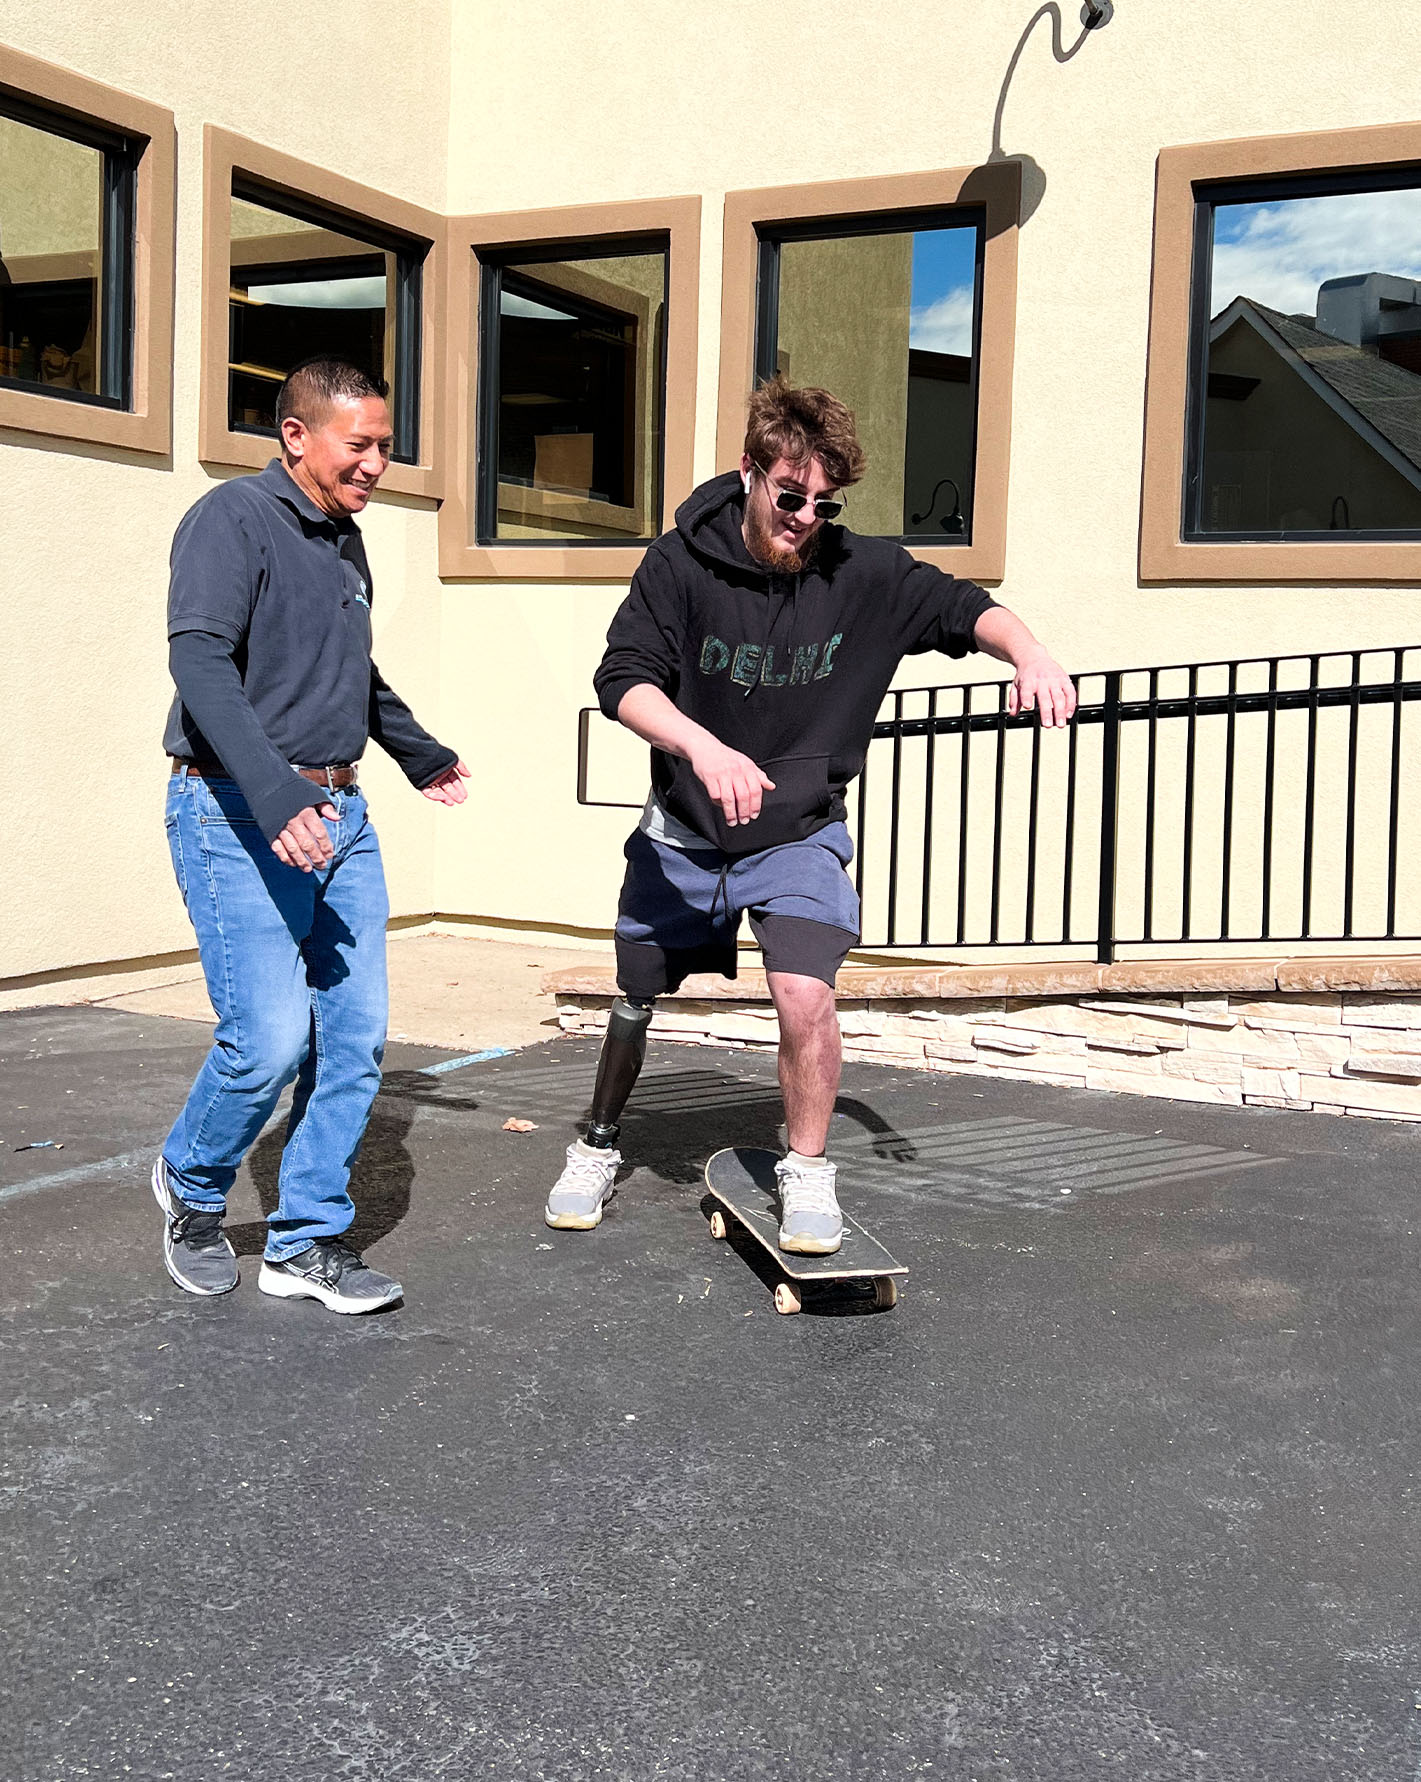 using a skateboard as an amputee